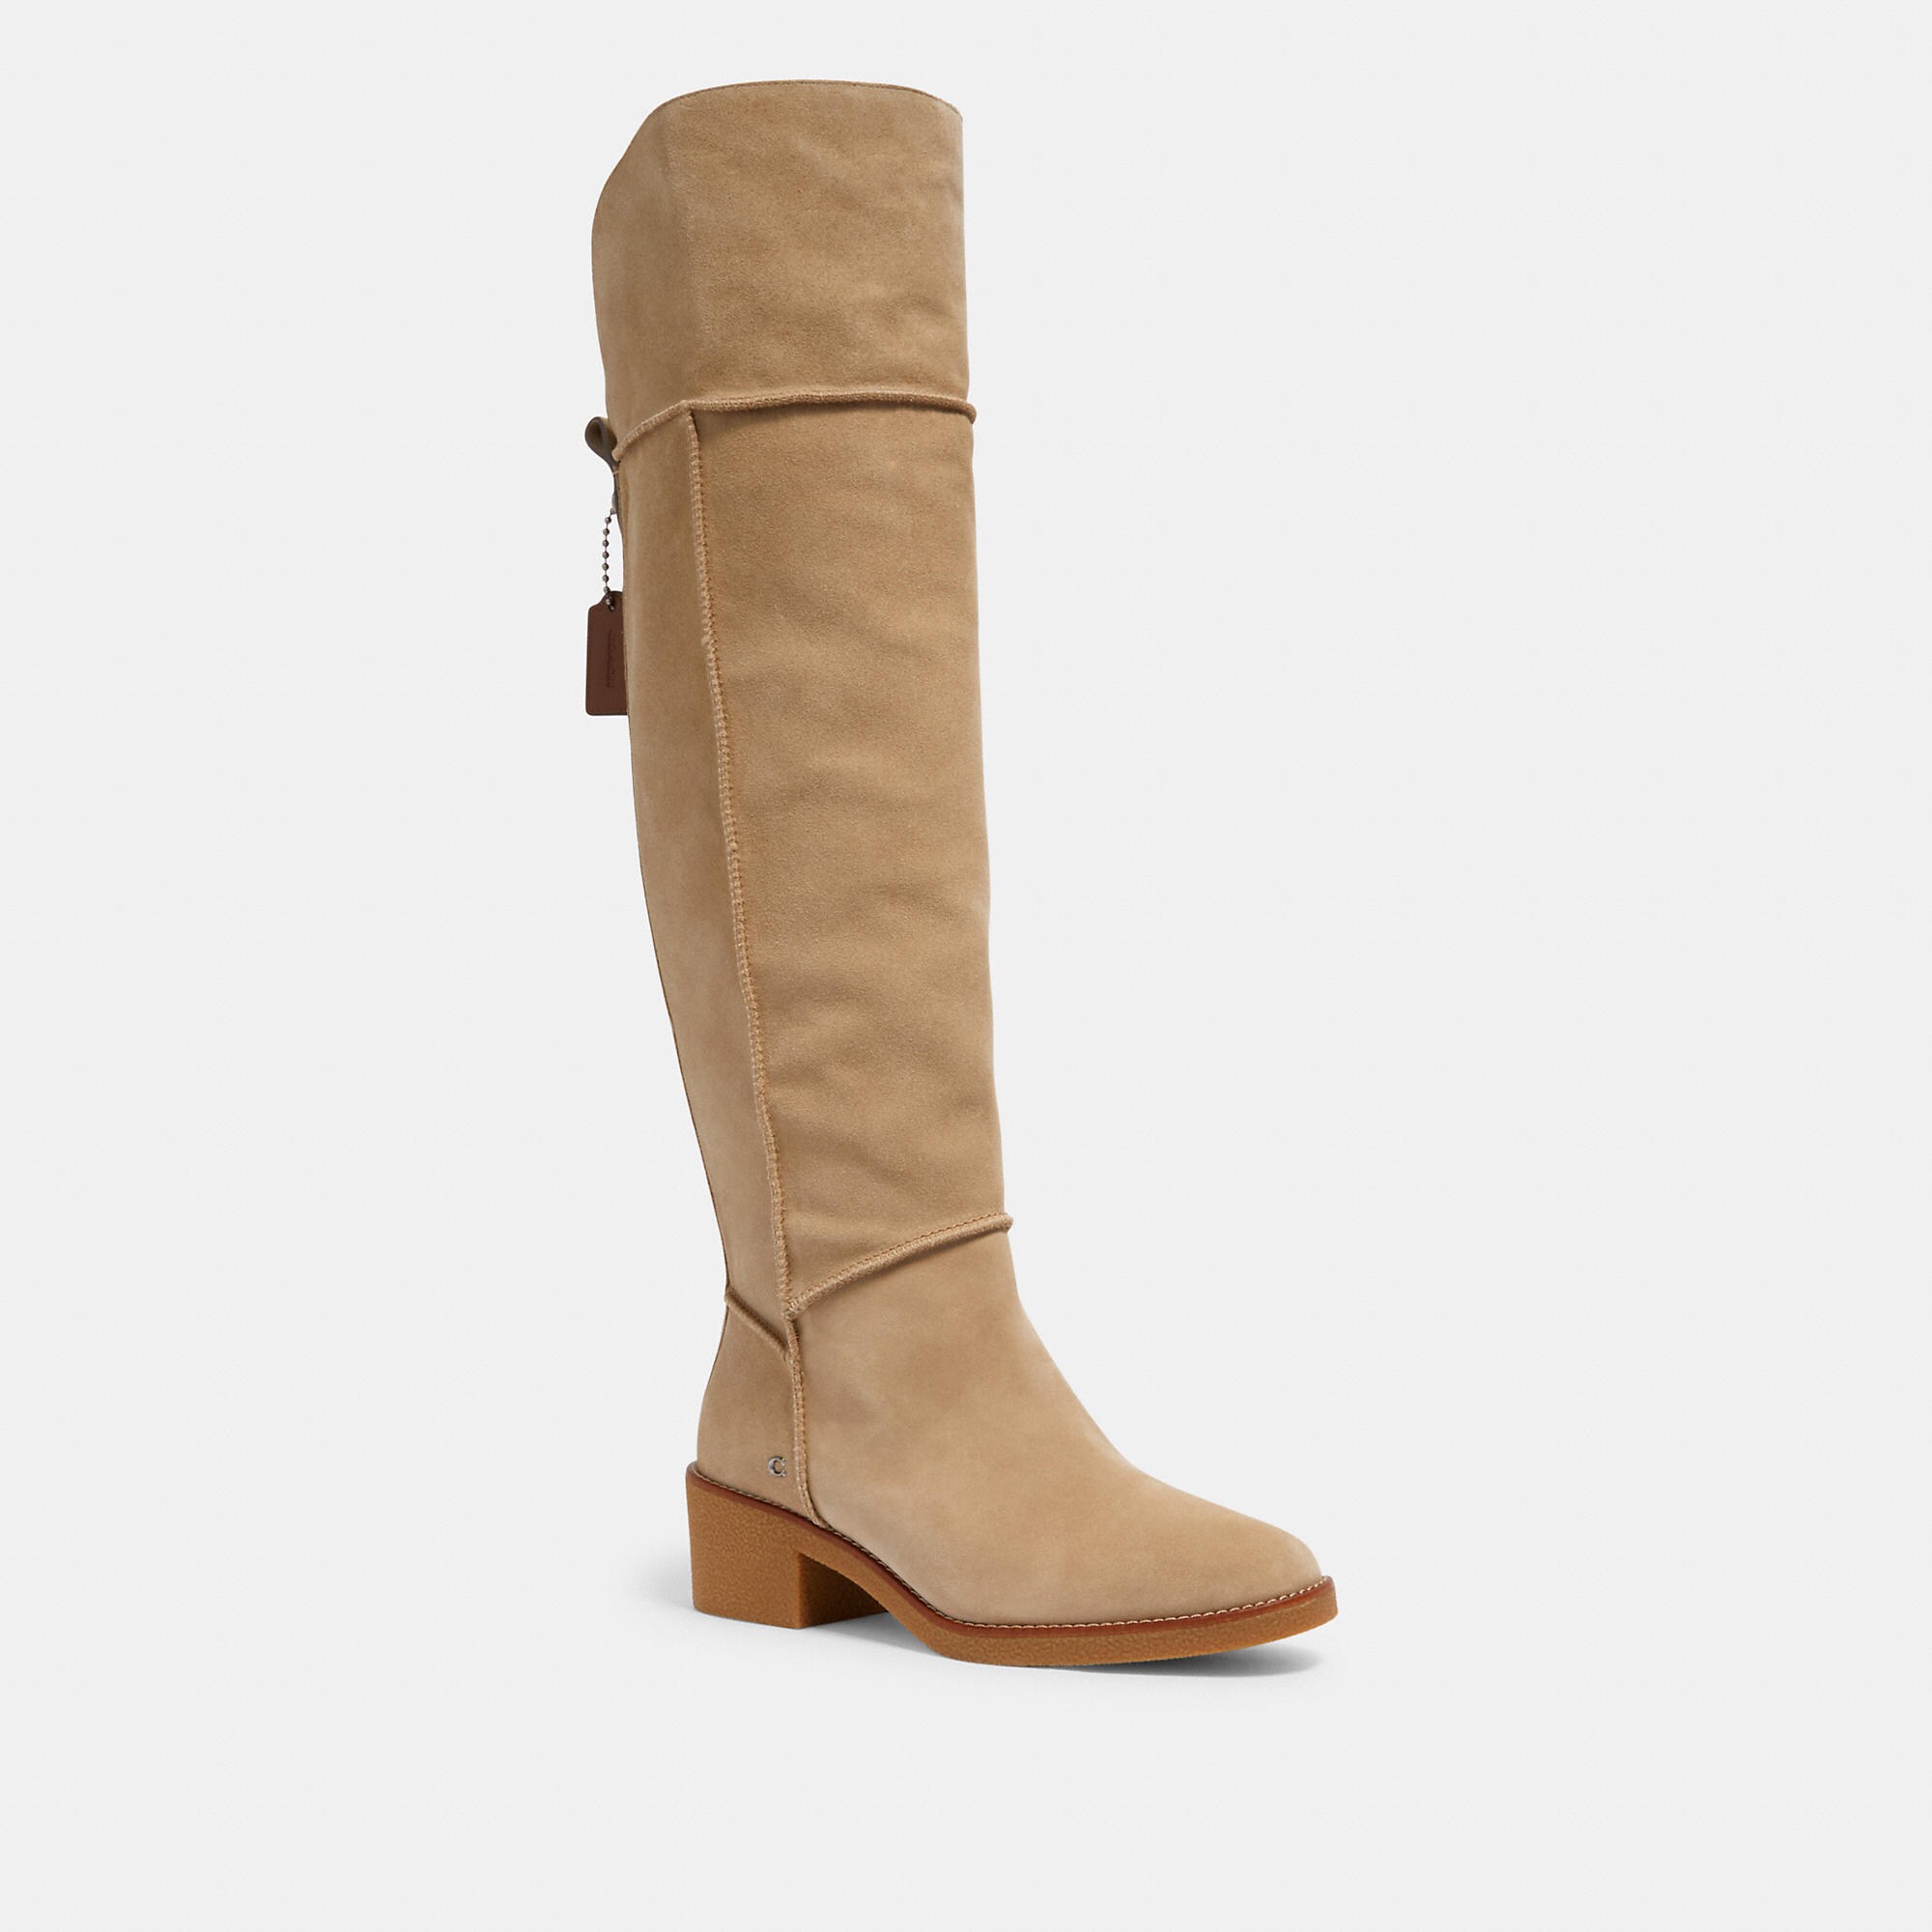 Coach Janelle Boot - Women's In Oat/natural